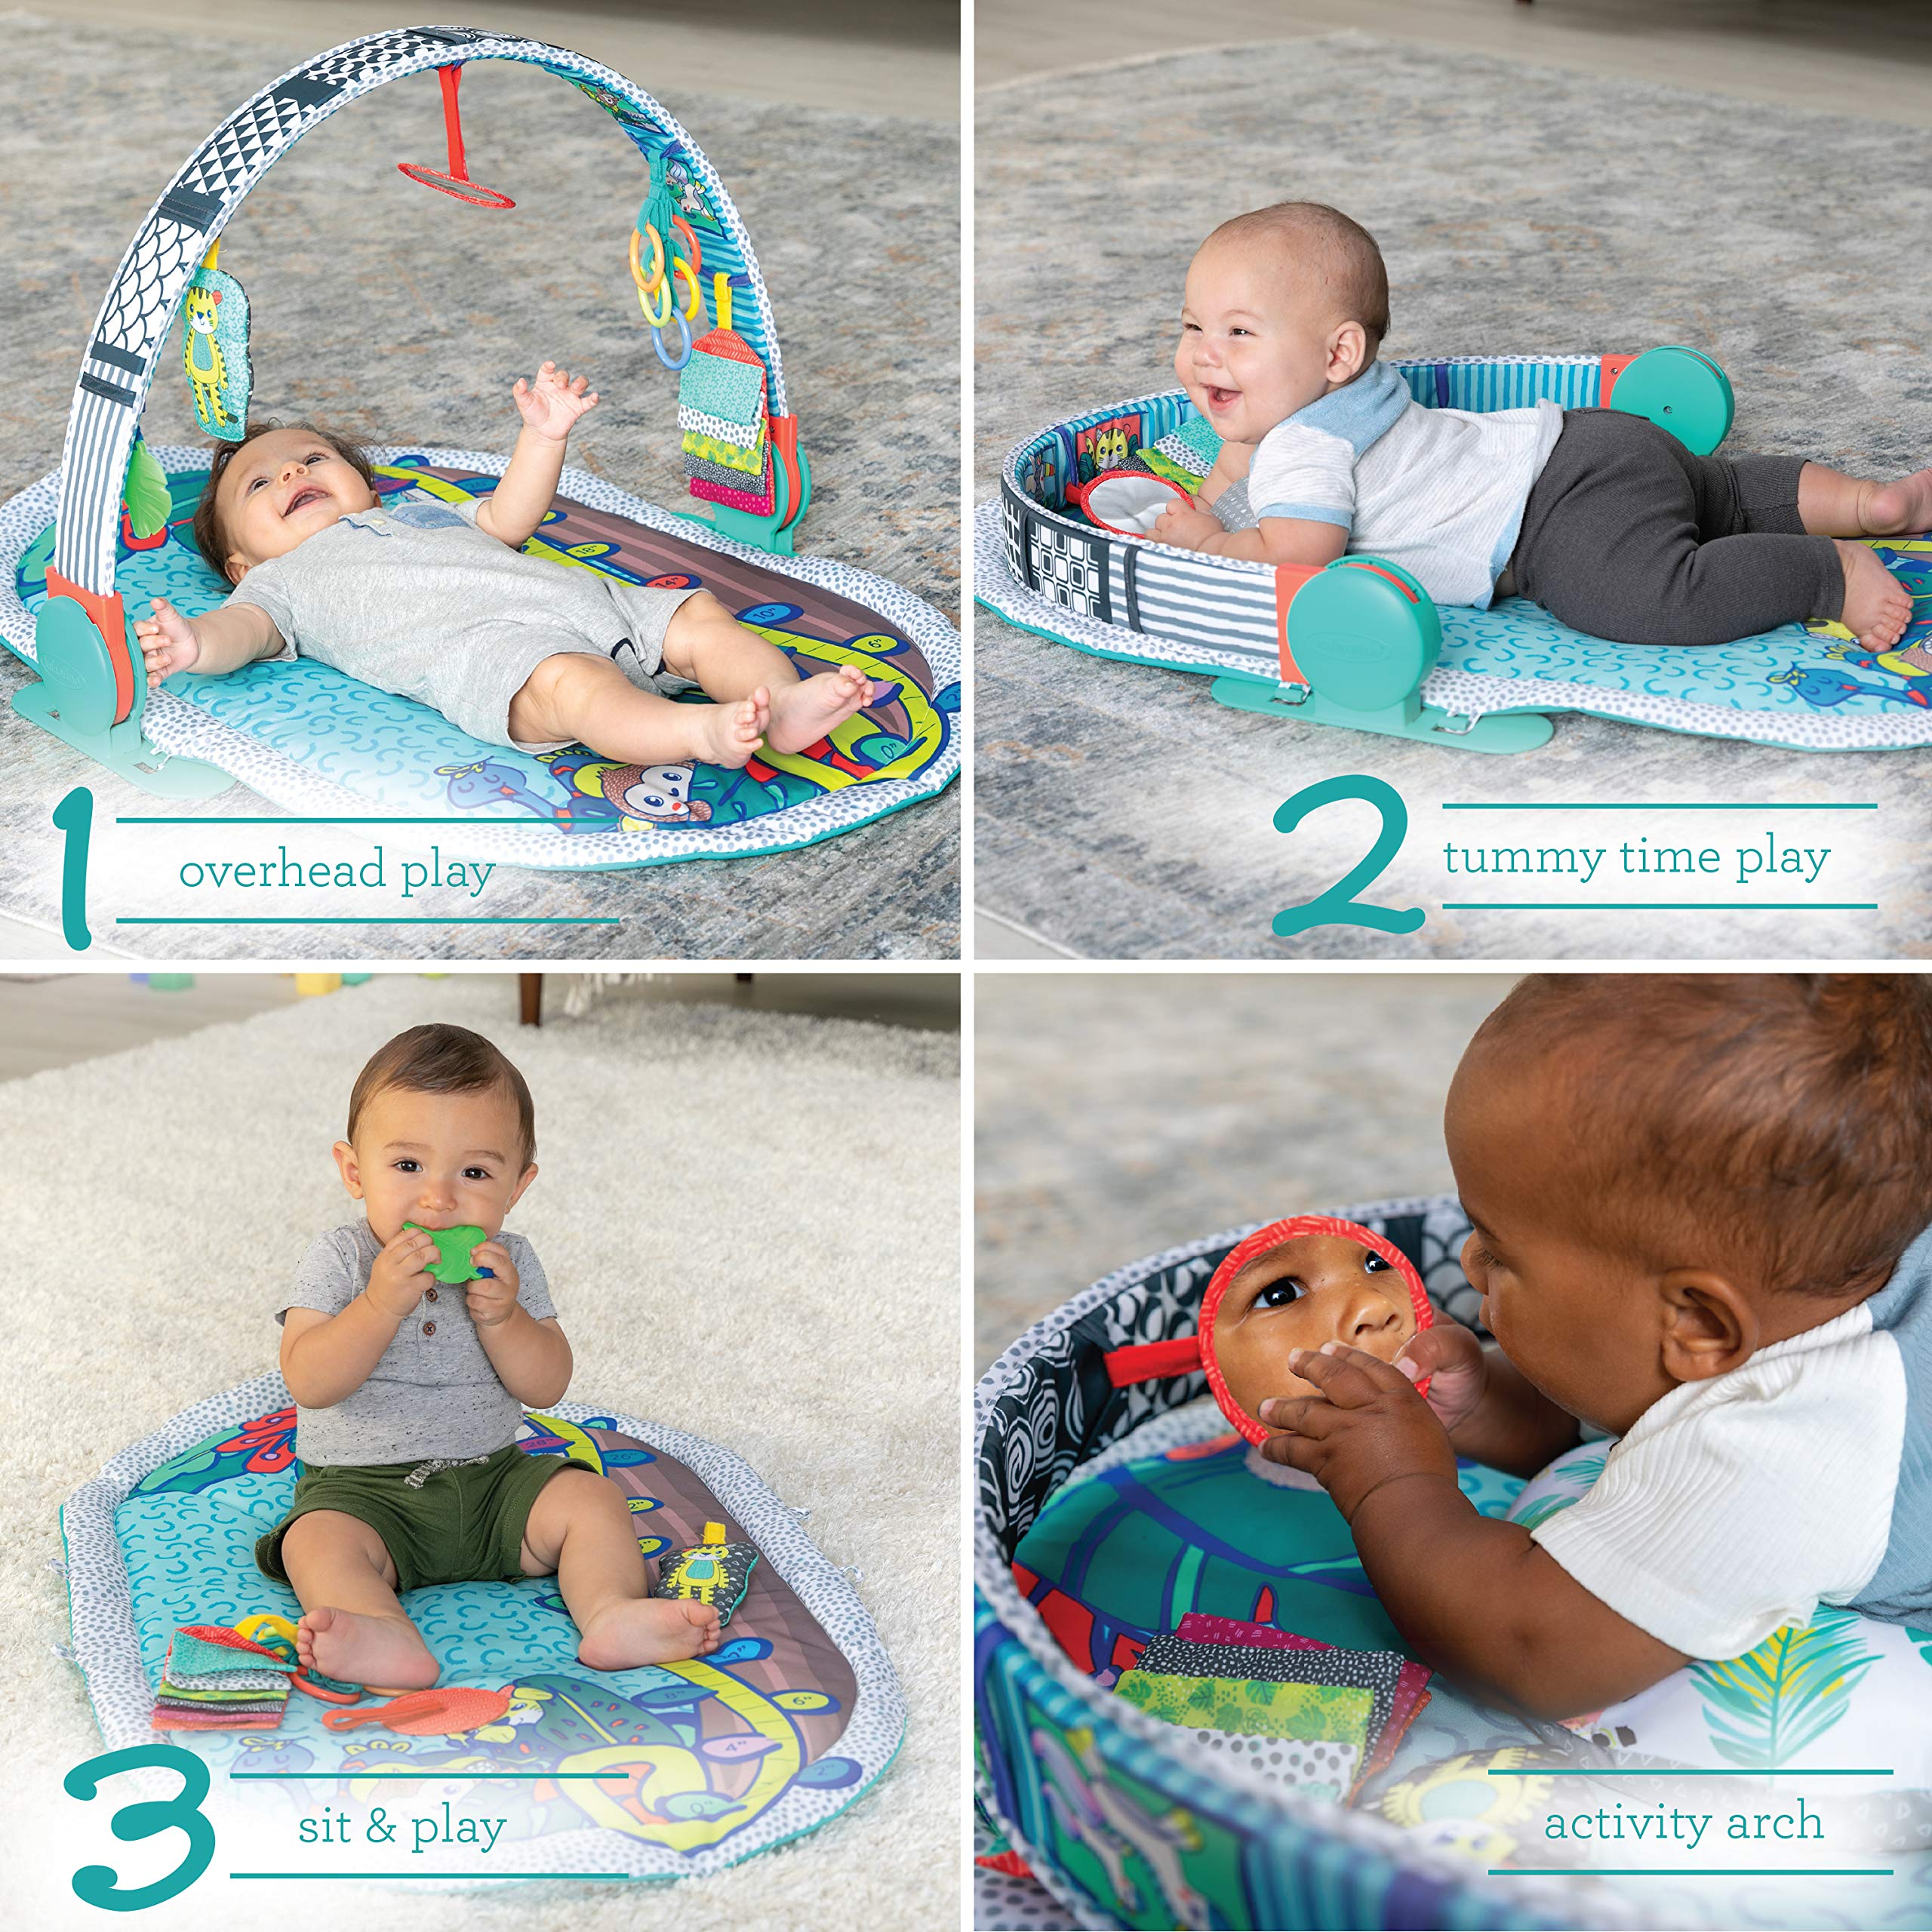 Infantino 3-in-1 Deluxe Magic Arch Sensory Development Gym - 3 Ways to Play with Dual-Sided Magical Arch for Captivating Overhead Visuals Plus Tummy-Time Bolster & Mat with Growth Chart, Teal